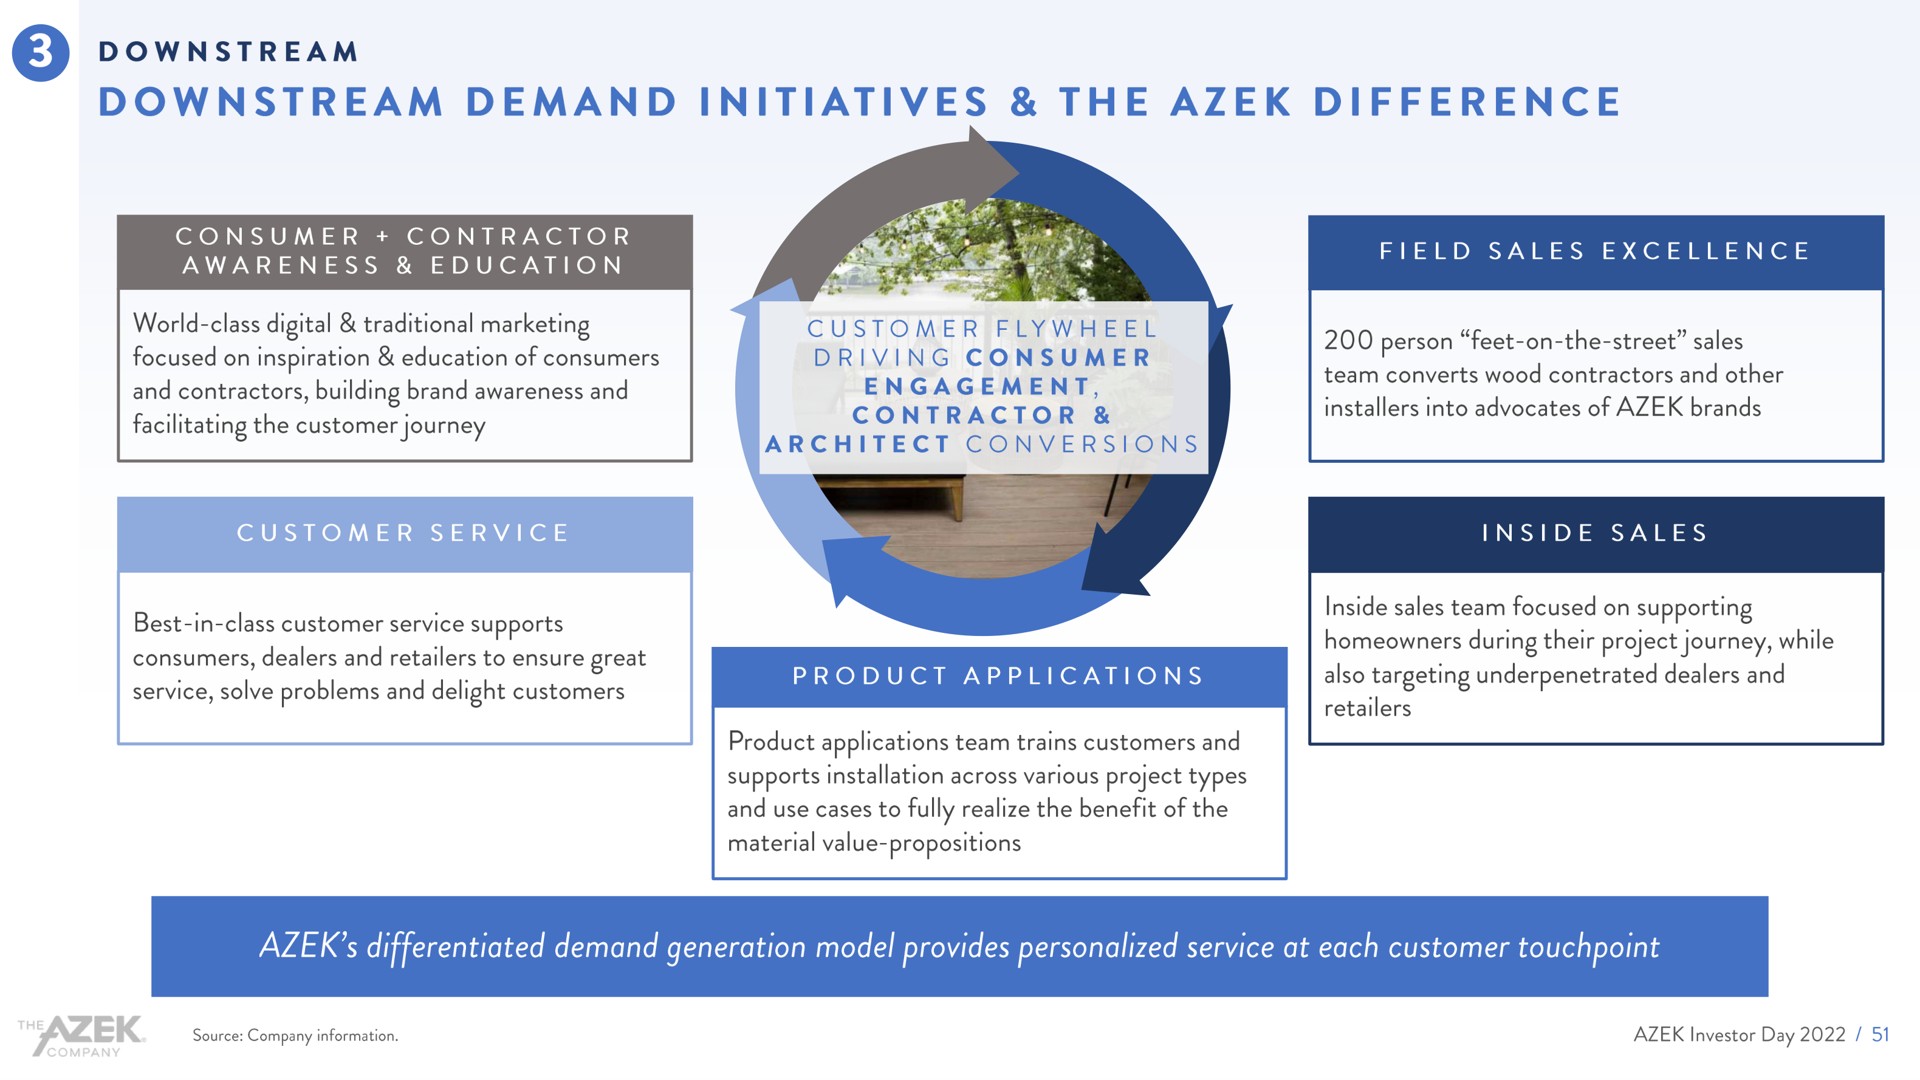 downstream downstream demand initiatives the difference | Azek